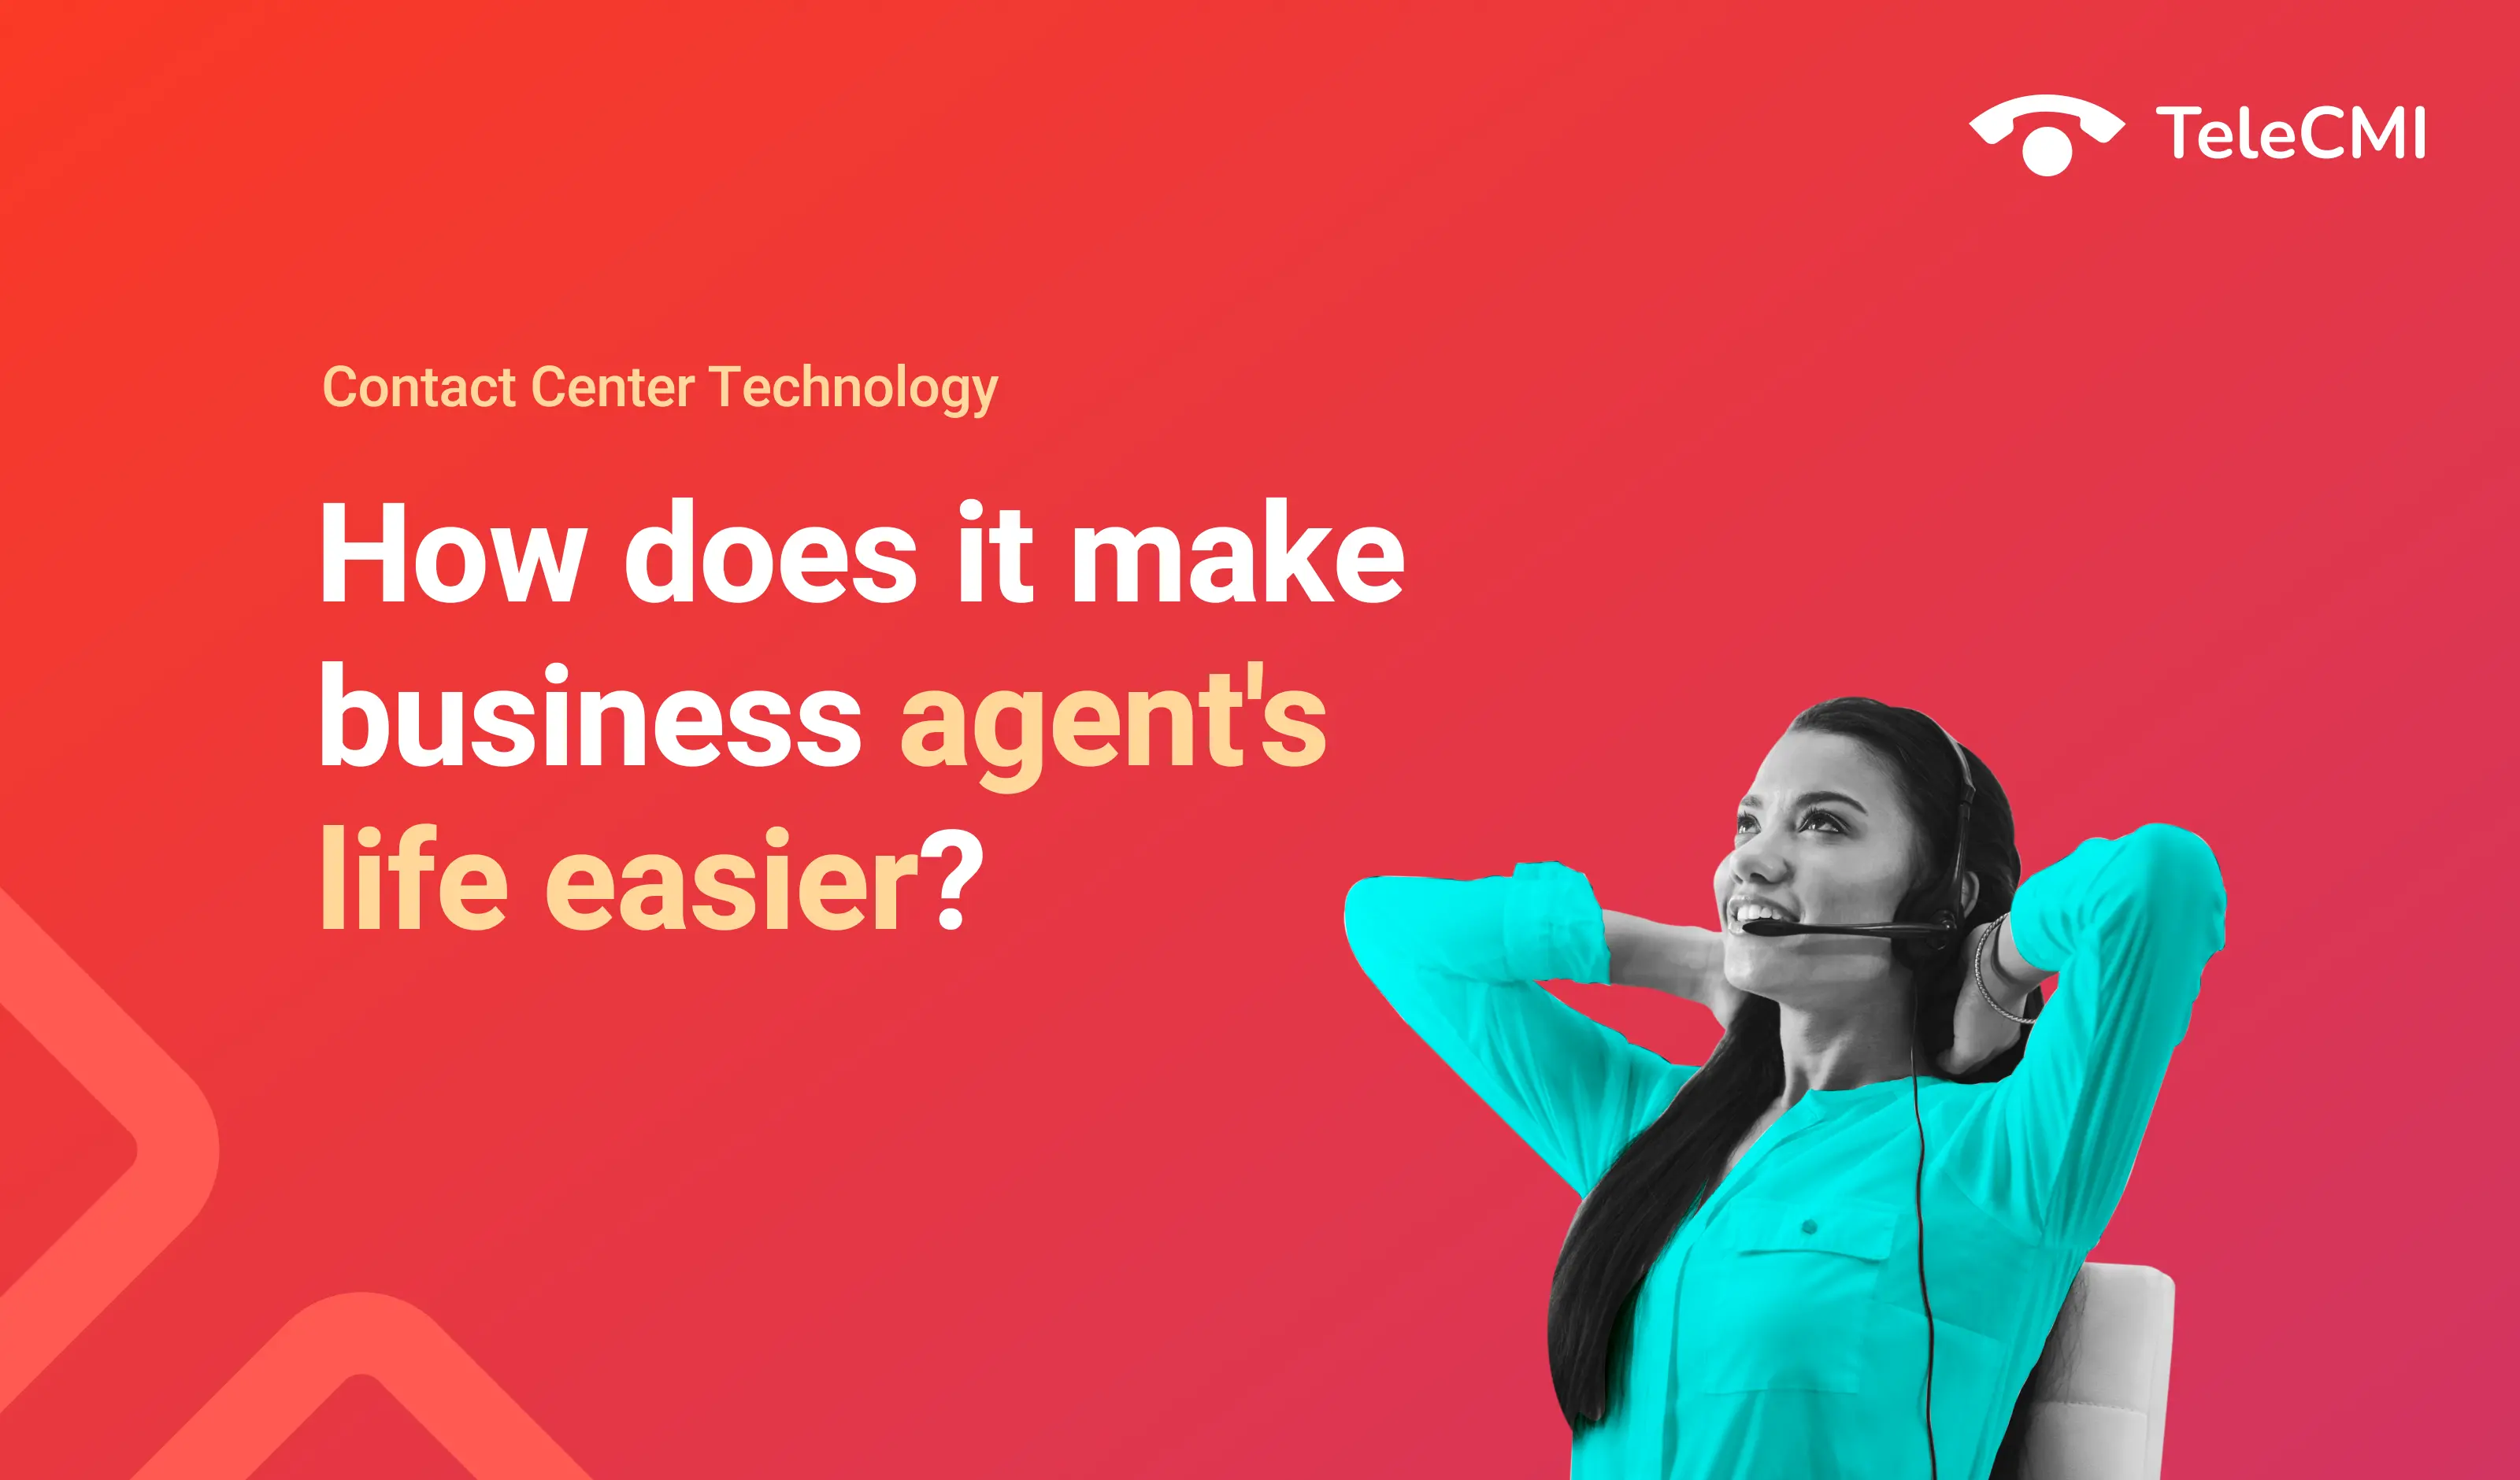 Contact Center Technology: How does it make business
                            agent's life easier?